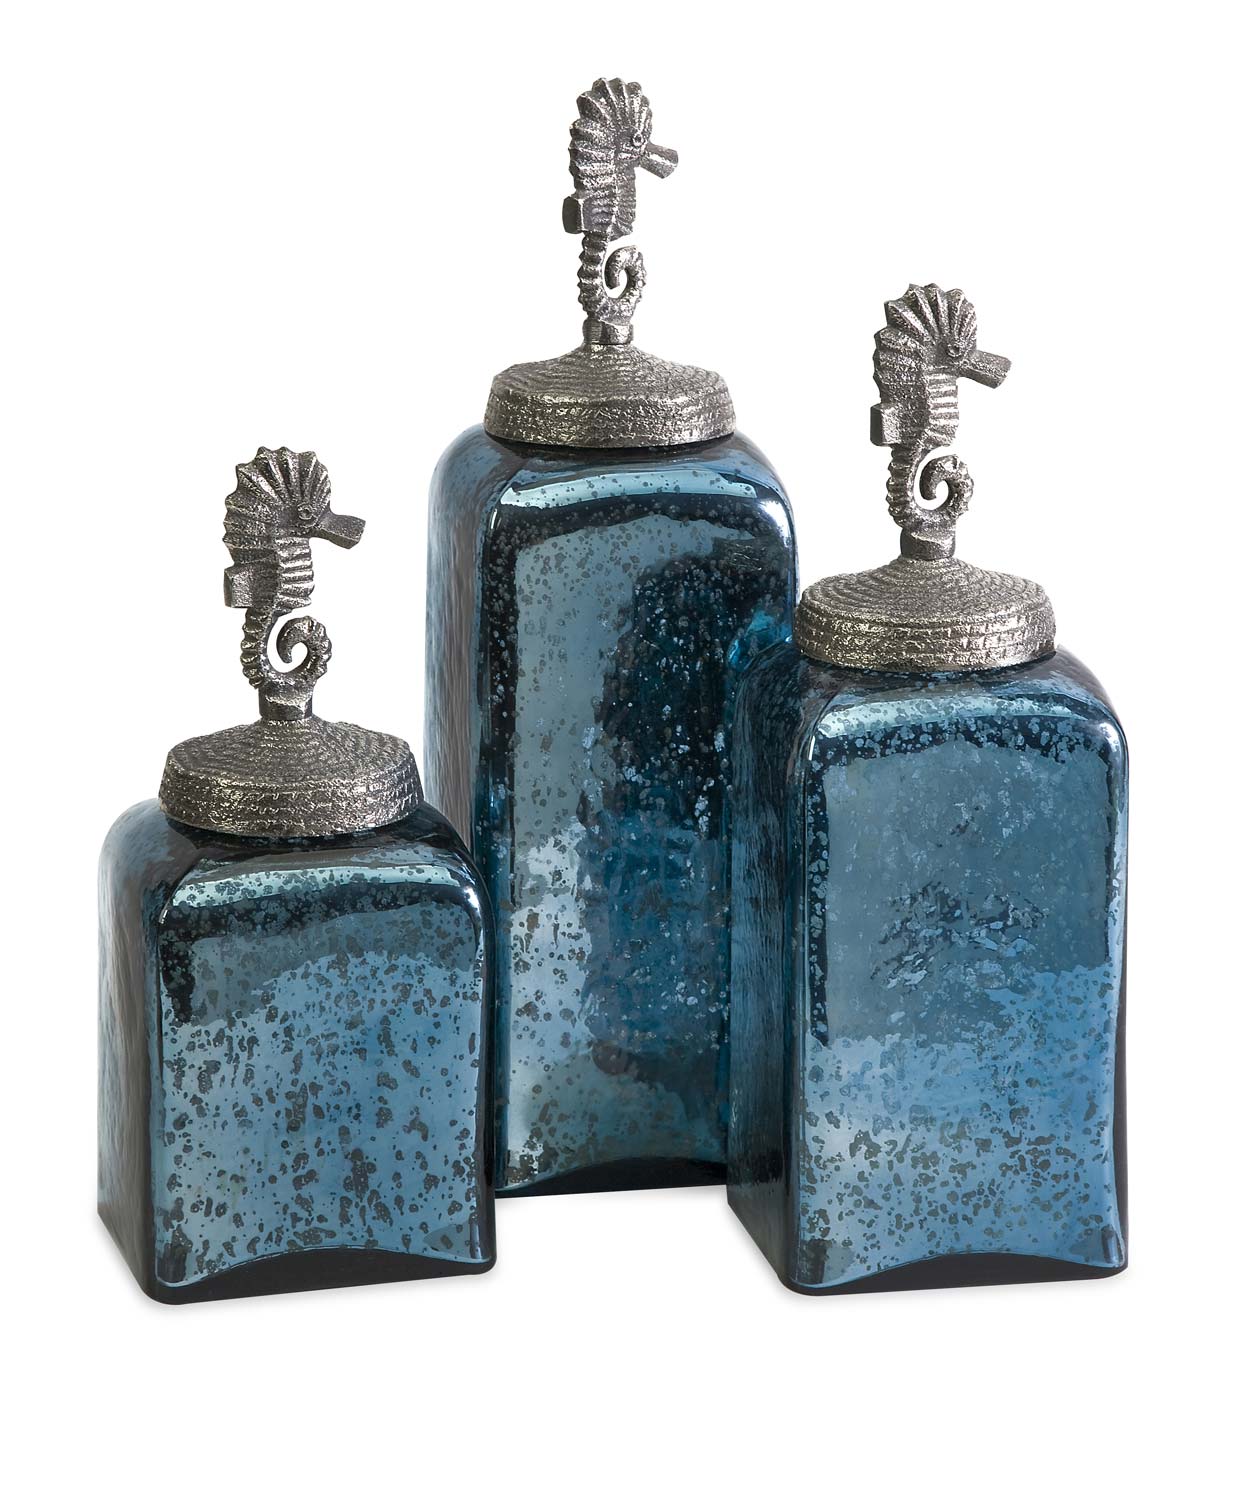 IMAX Hammered Glass Seahorse Canisters - Set of 3